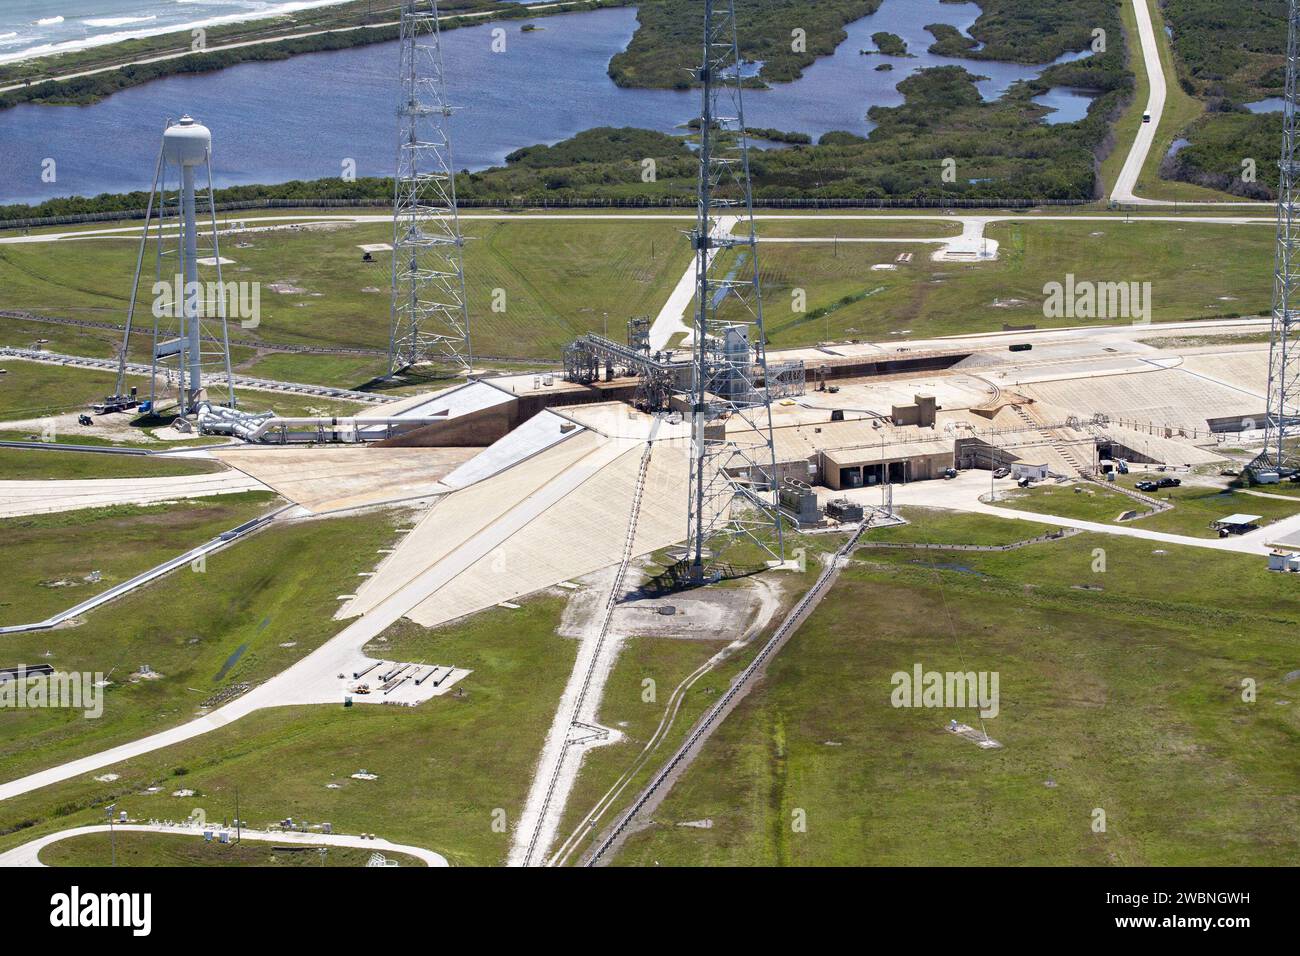 CAPE CANAVERAL, Fla. – An aerial view shows construction progress at Launch Pad 39B at NASA’s Kennedy Space Center in Florida. A new elevator has been constructed on the surface of the pad and the crawlerway leading up to the surface is being repaired. Repairs also are being made to the crawler track panels and catacomb roof below on either side of the flame trench. Also in view are the water tower and two of the three tall lightning towers that surround the pad. Upgrades are underway at Pad B and other facilities in the Launch Complex 39 area. The Ground Systems Development and Operations, or Stock Photo